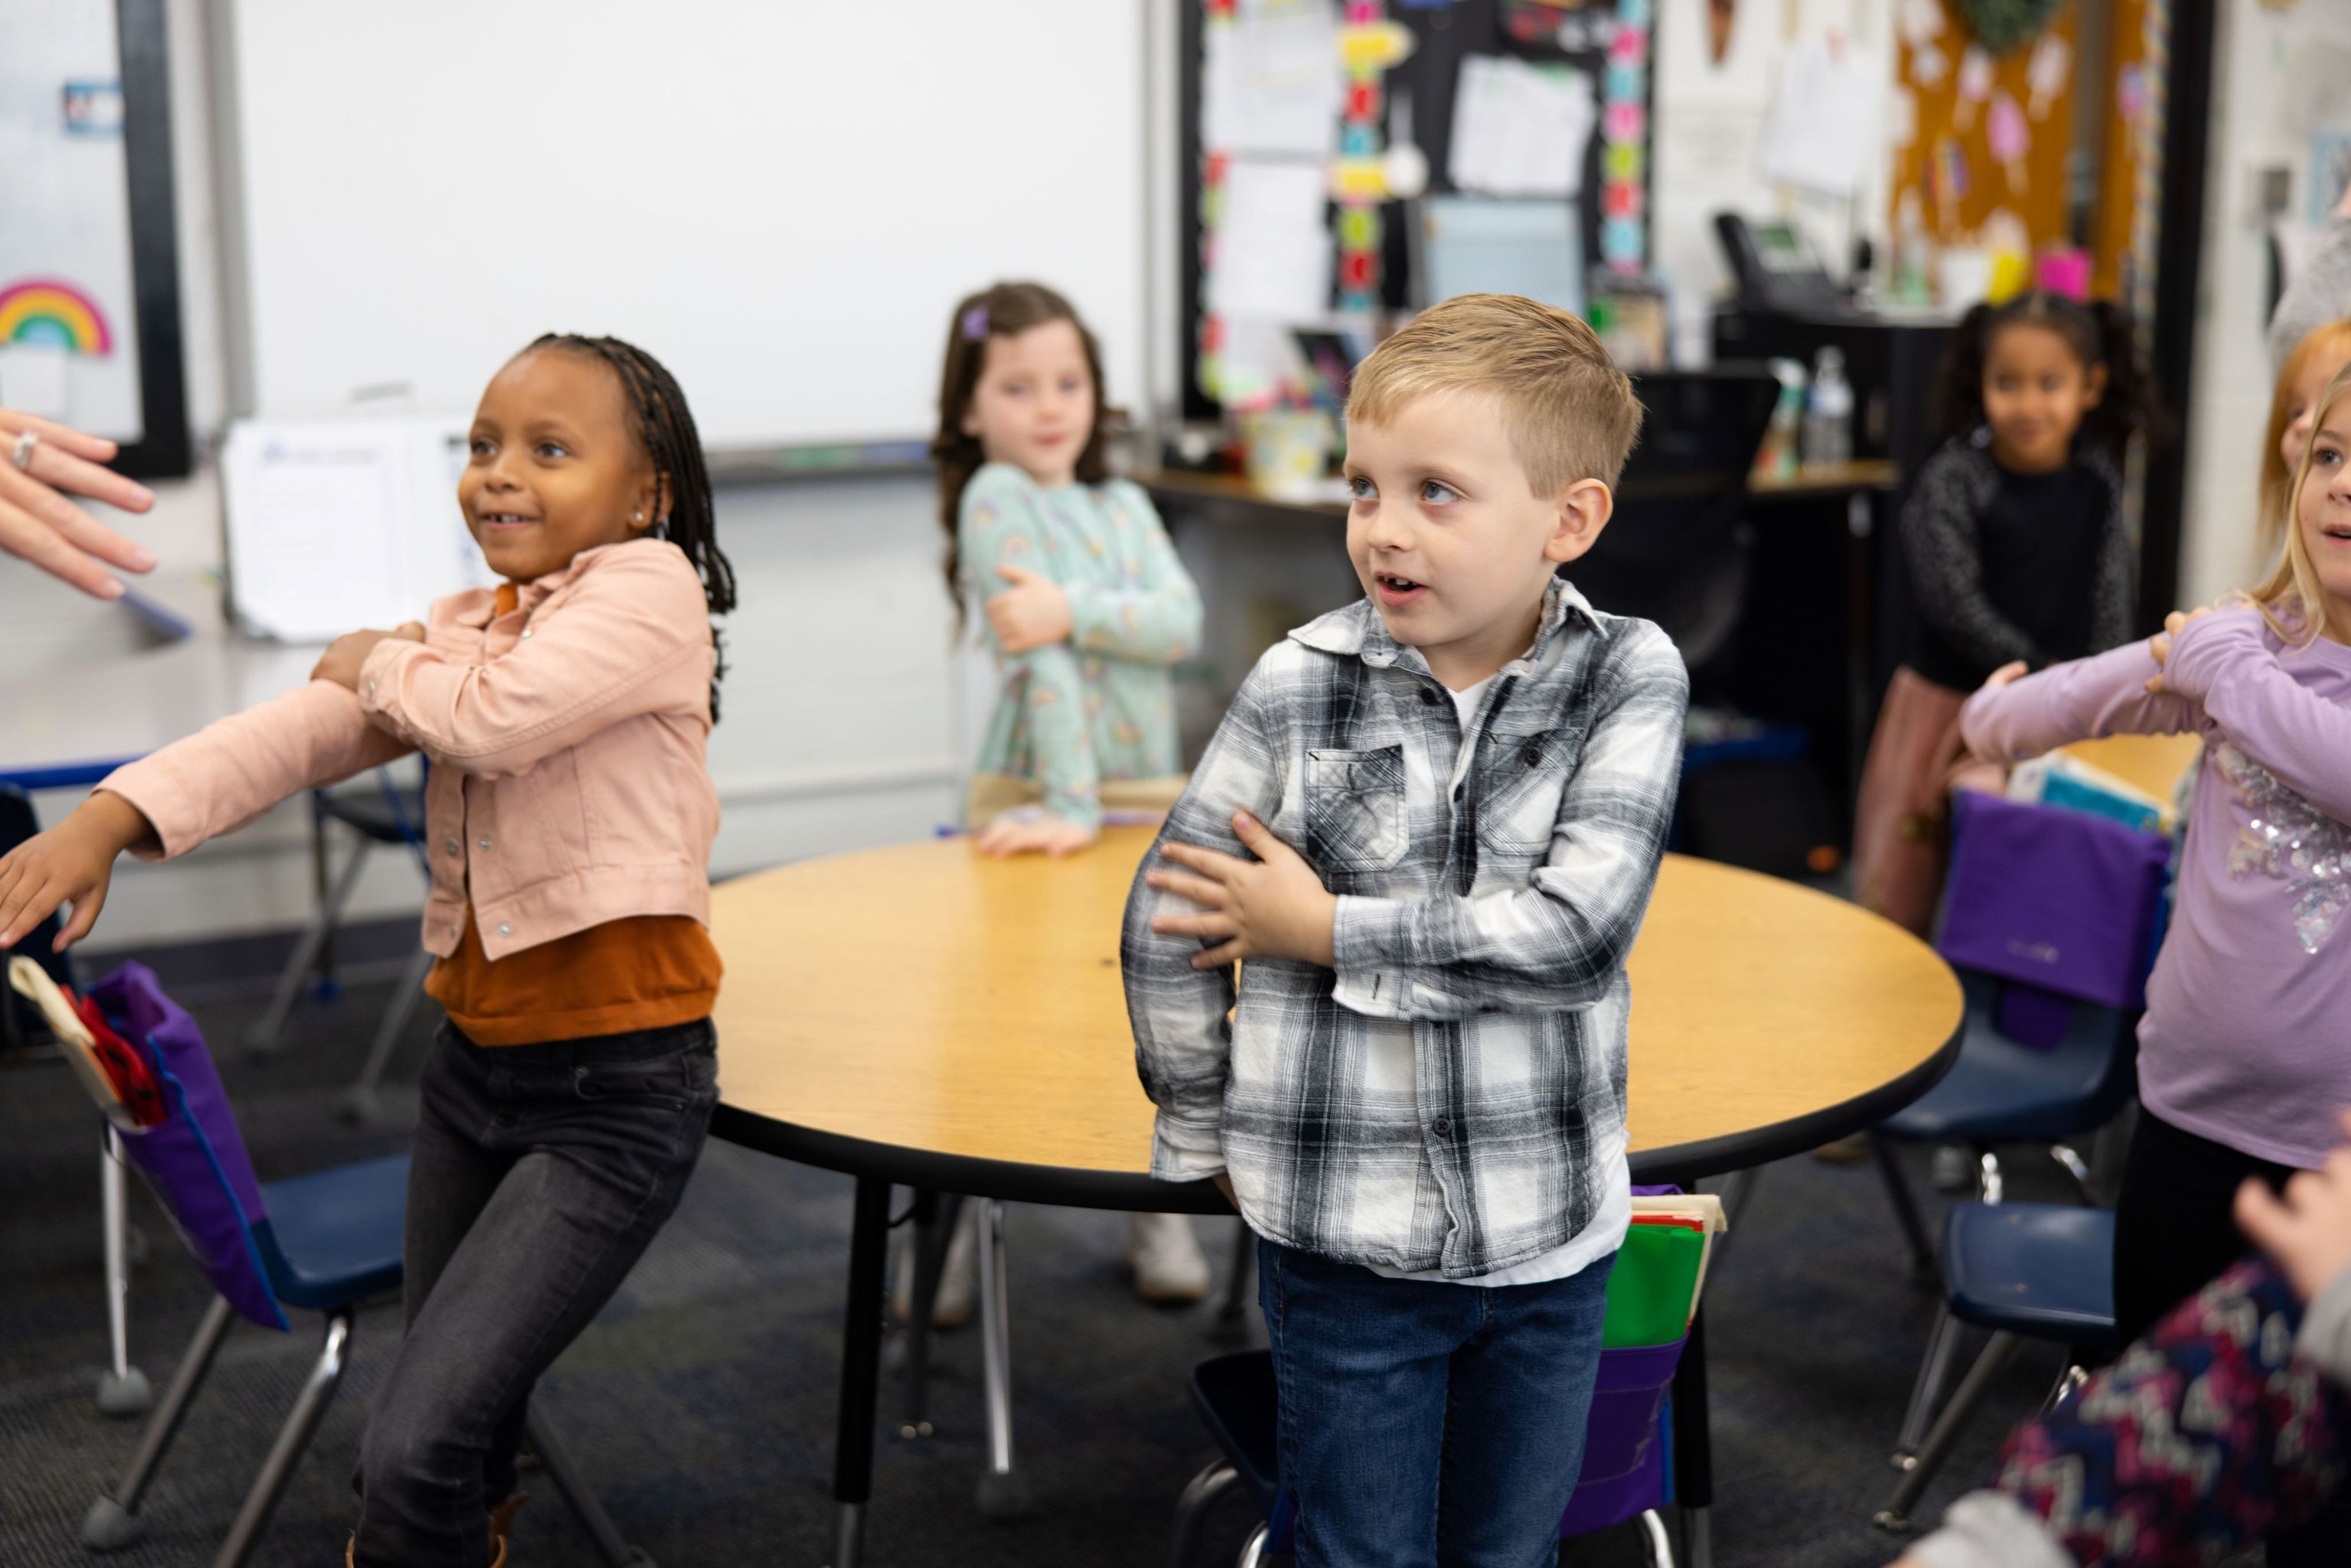 Students touching their arms while playing a rhyming game.